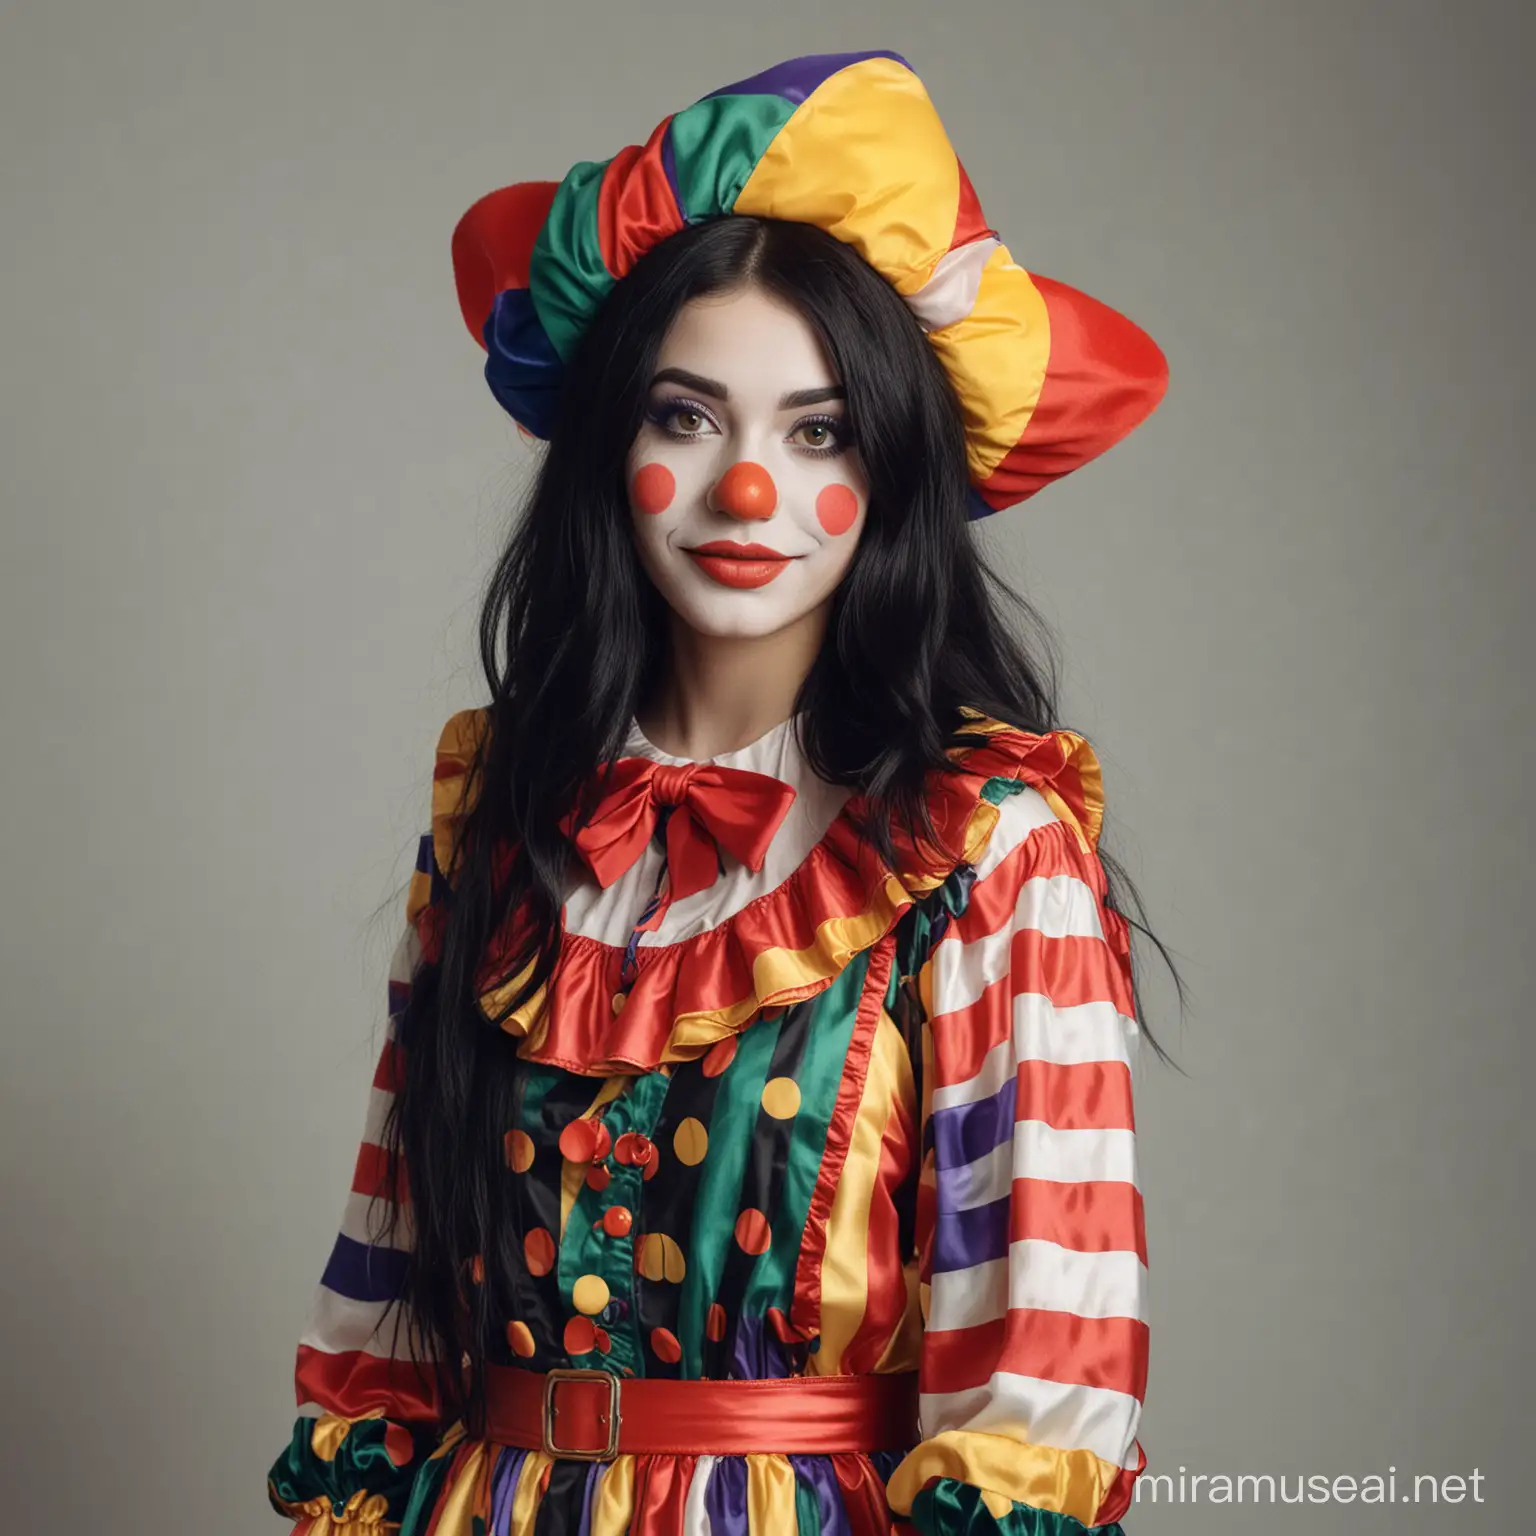 Young Woman in Playful Clown Costume with Long Black Hair